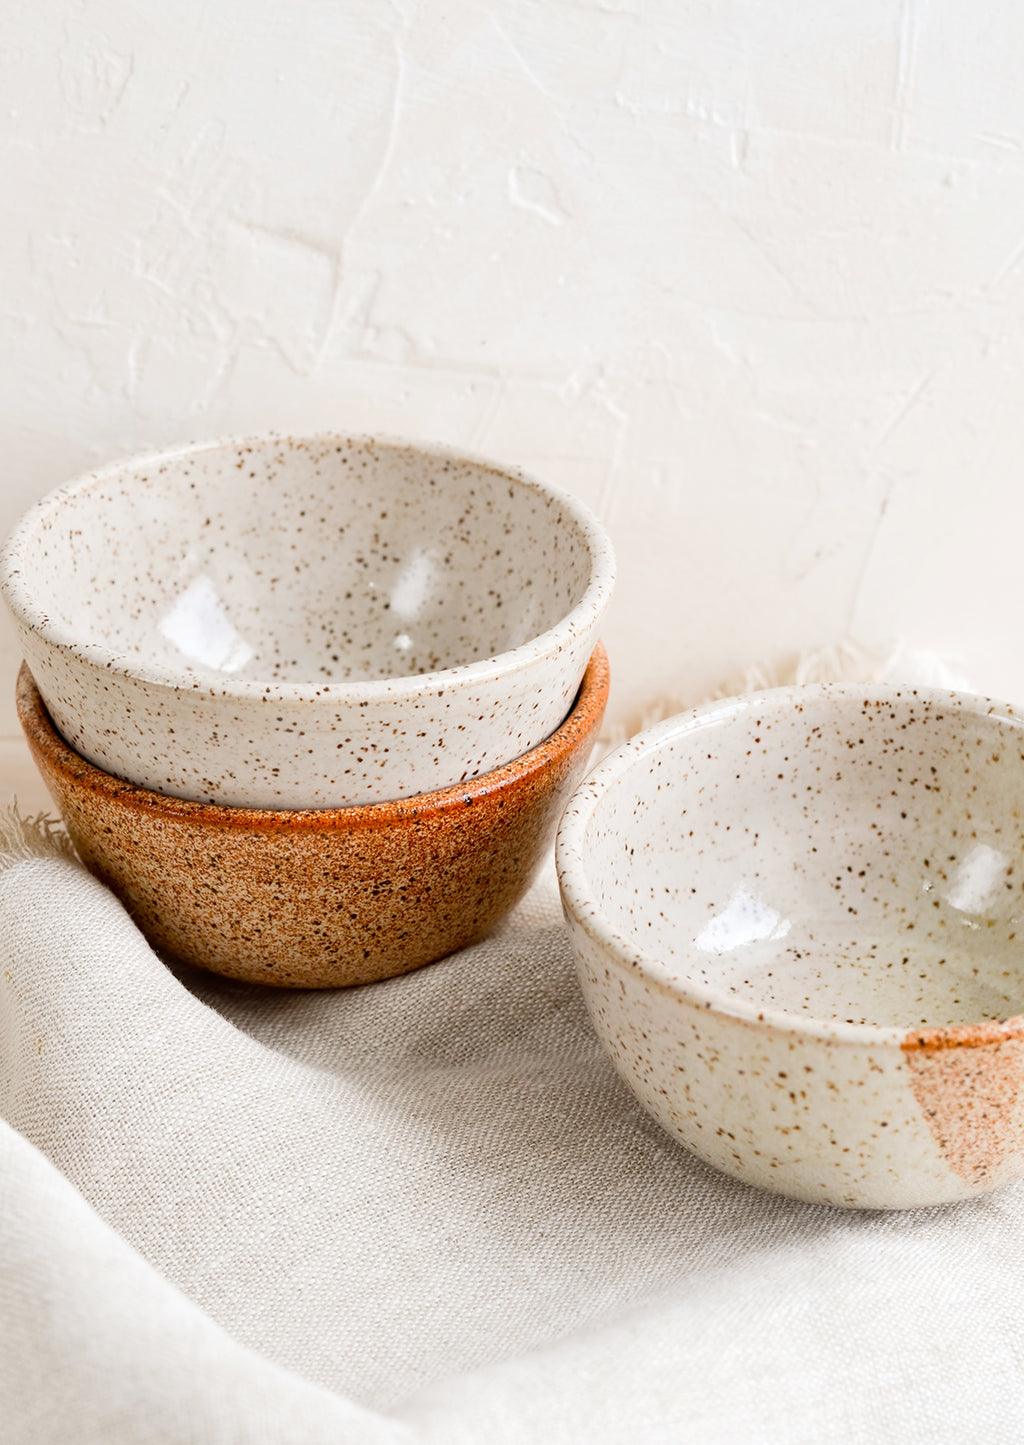 3: A stack of three small speckled ceramic bowls.